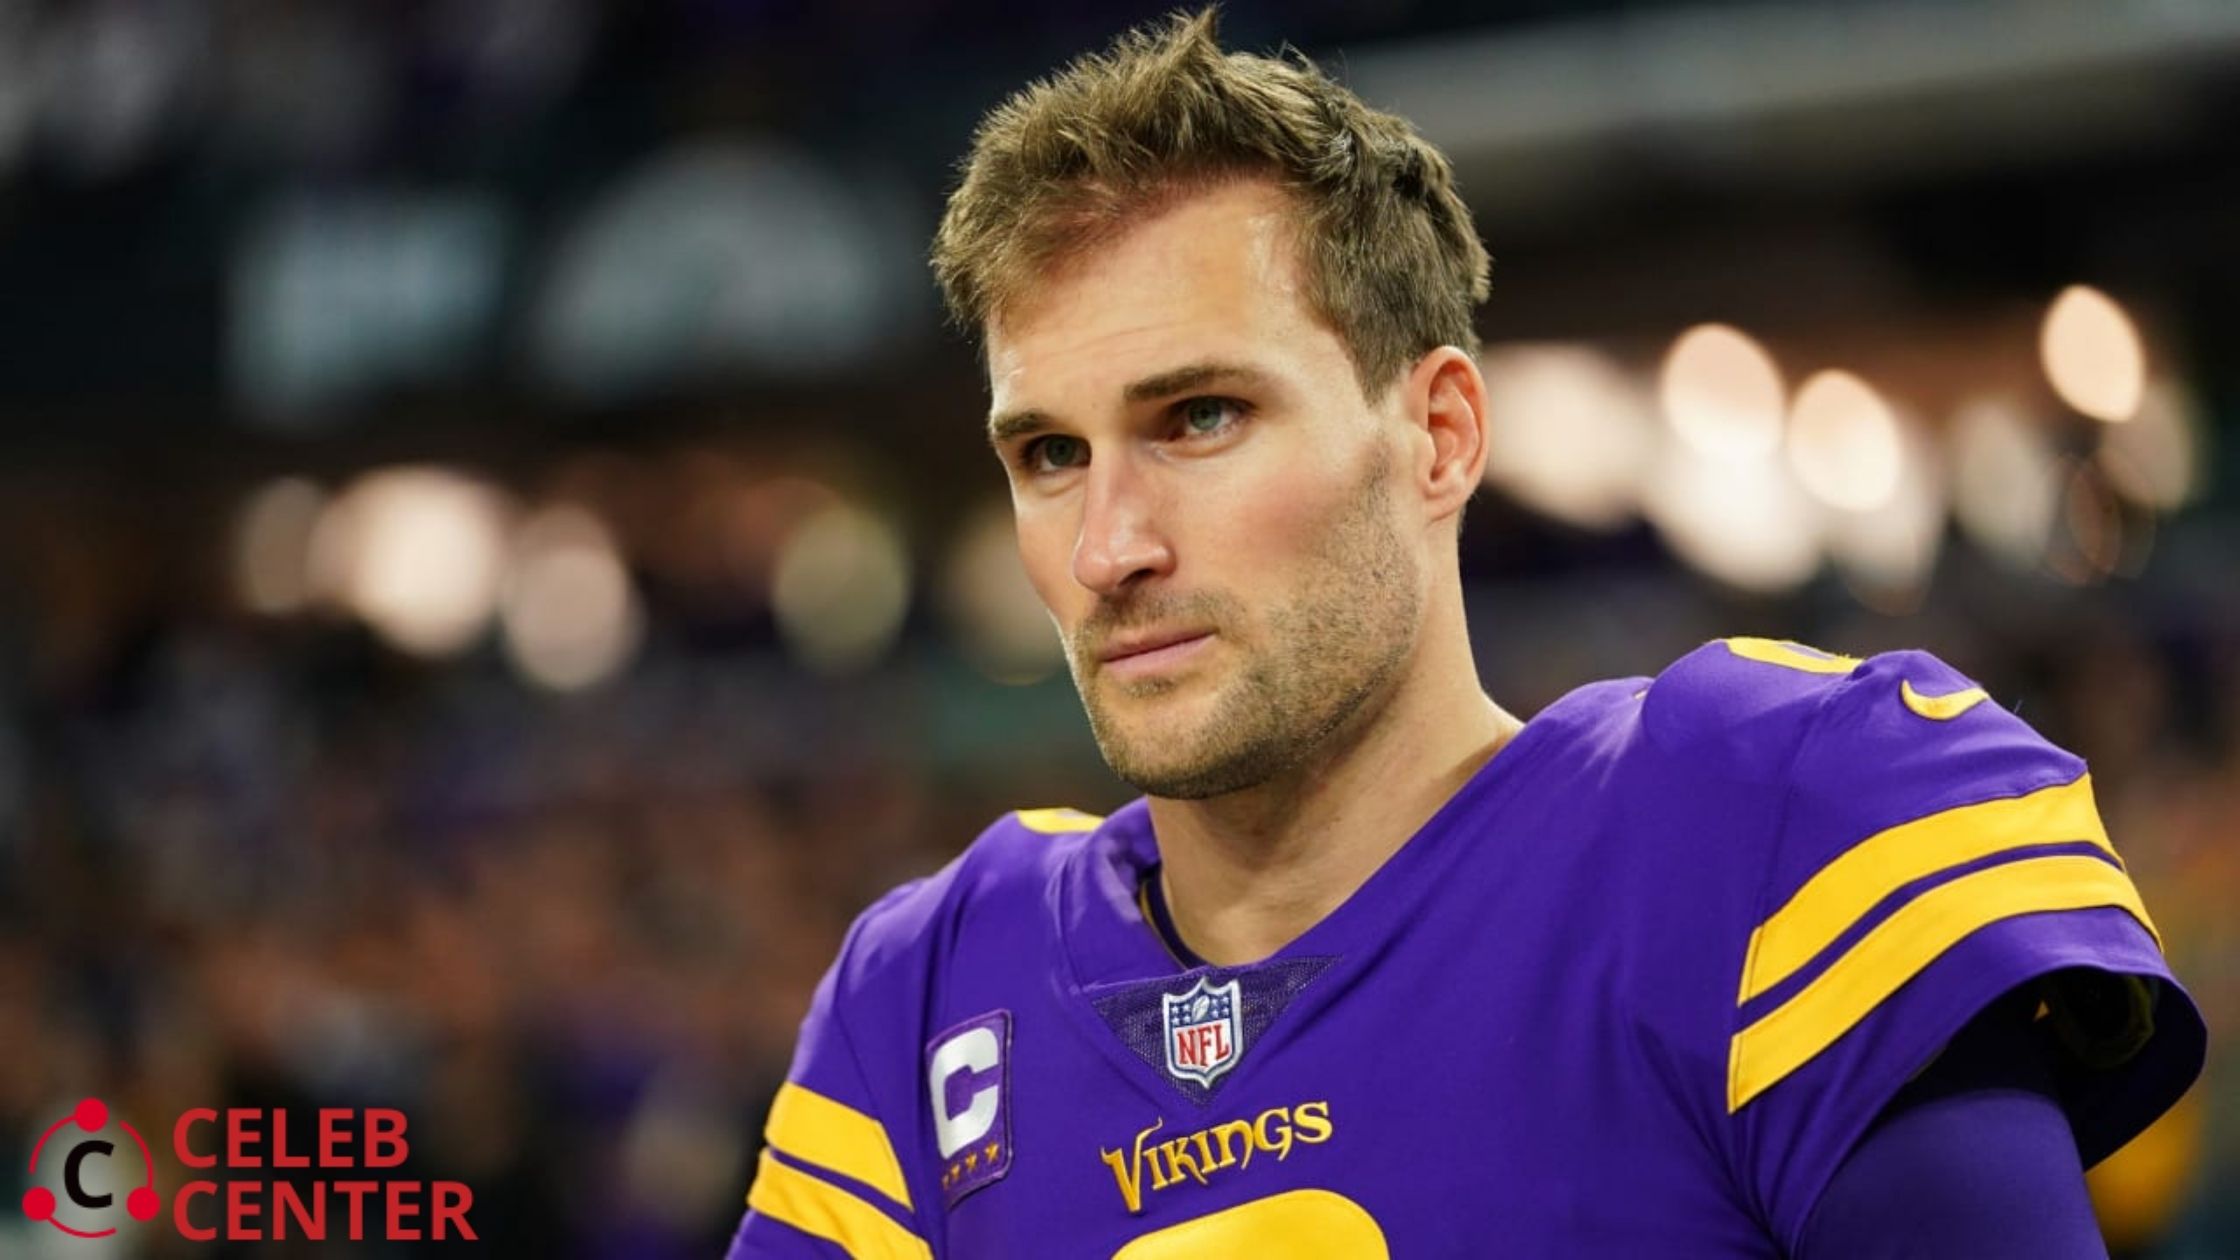 Kirk Cousins Biography, Age, Height, Family, Wife & Net Worth